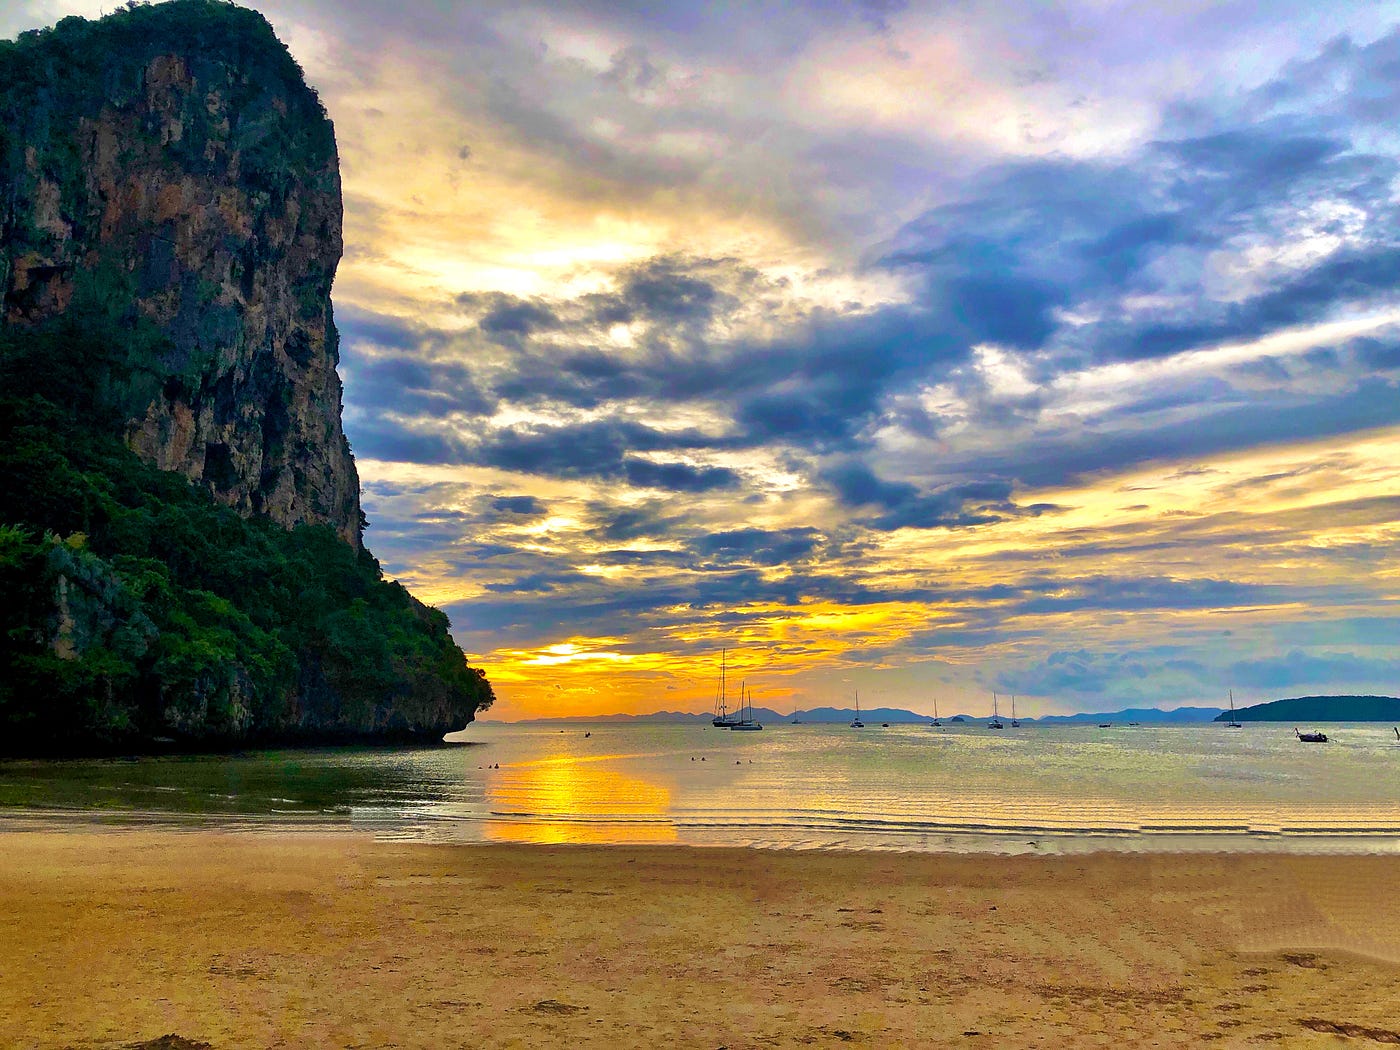 Two Adventures You Don't Want To Miss At Railay Beach, by Andy Fine